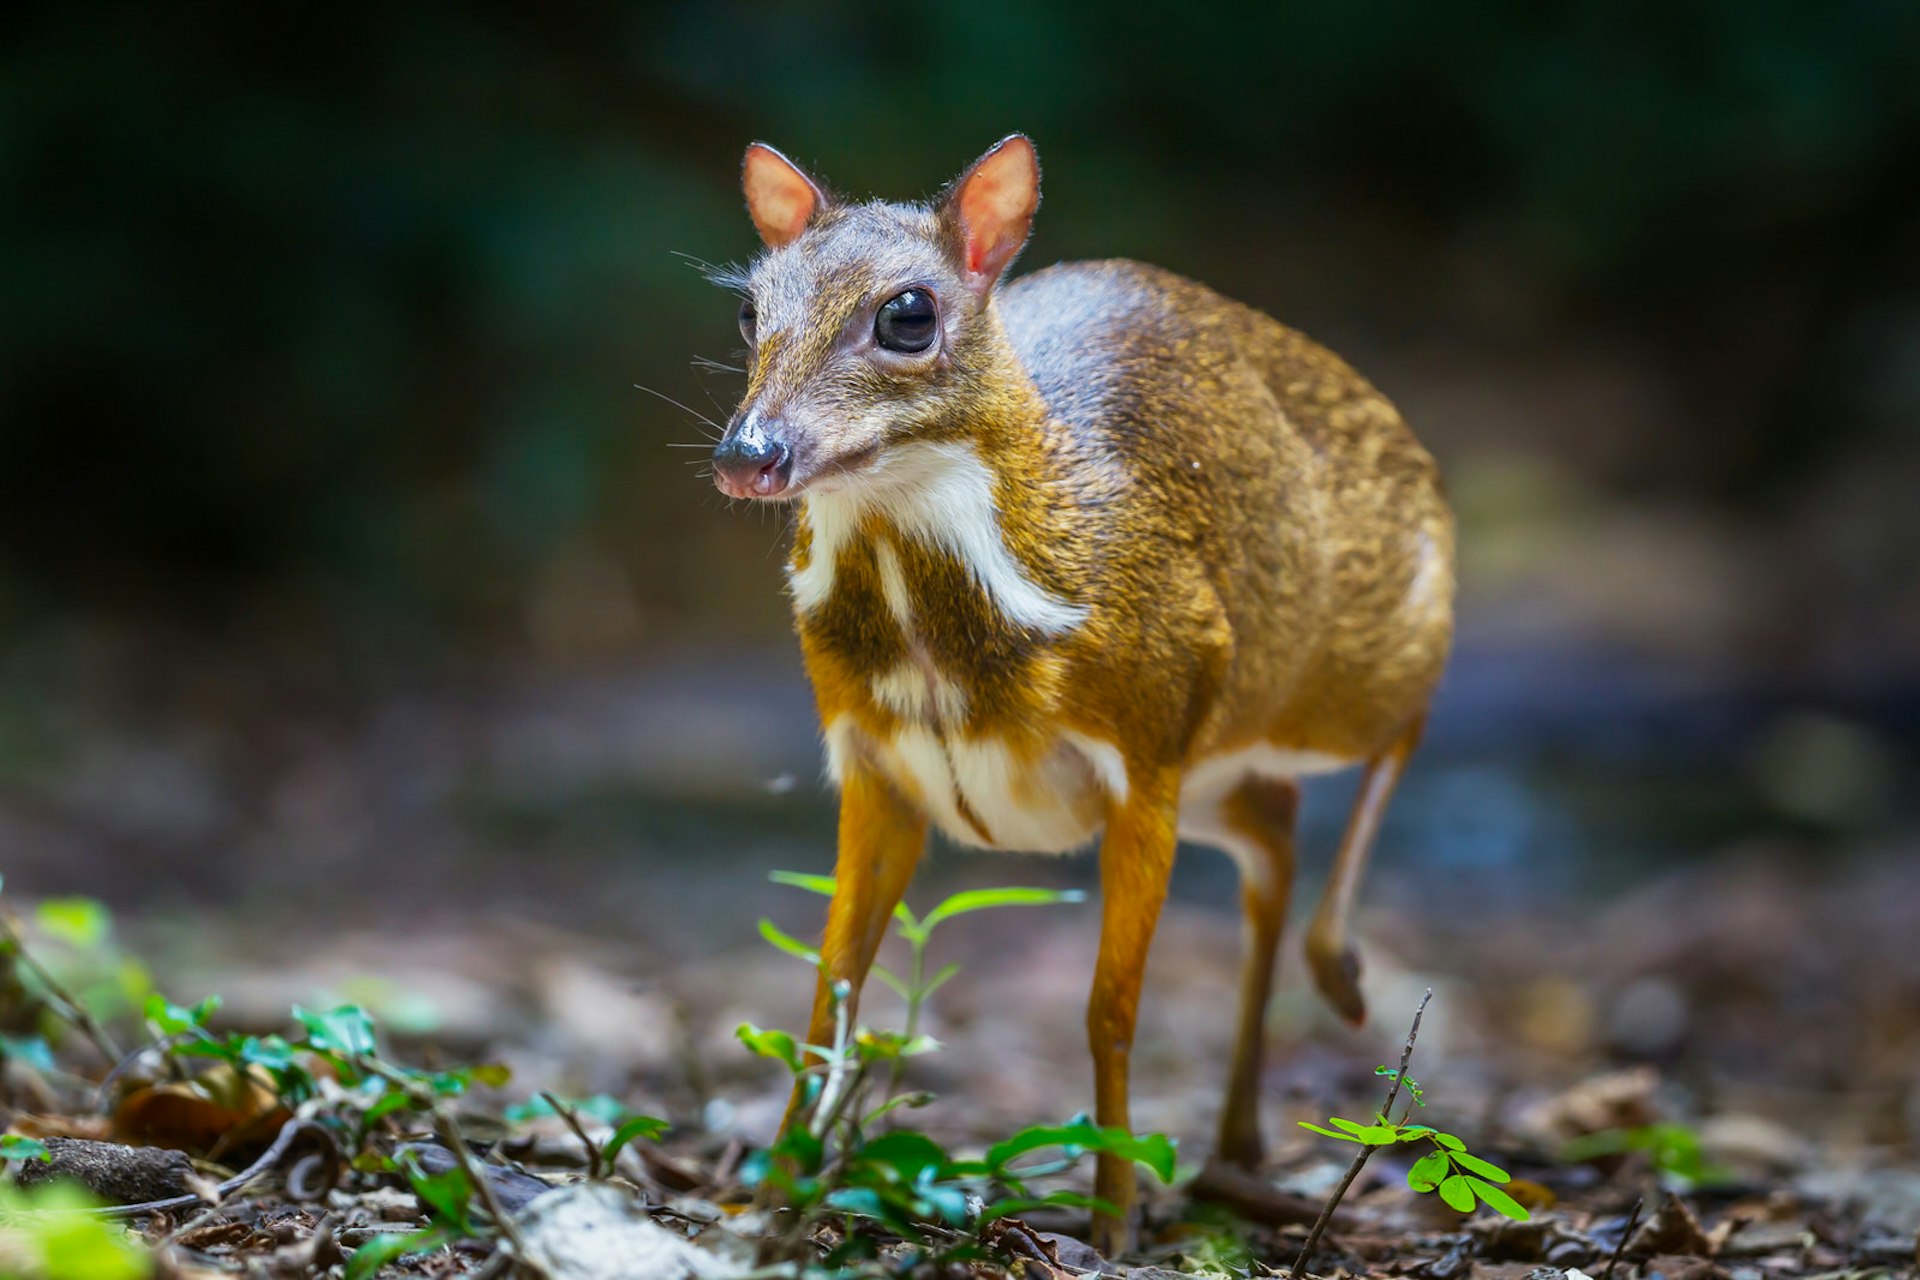 Wildlife-watching in Thailand's Khao Sok National Park - Lonely Planet